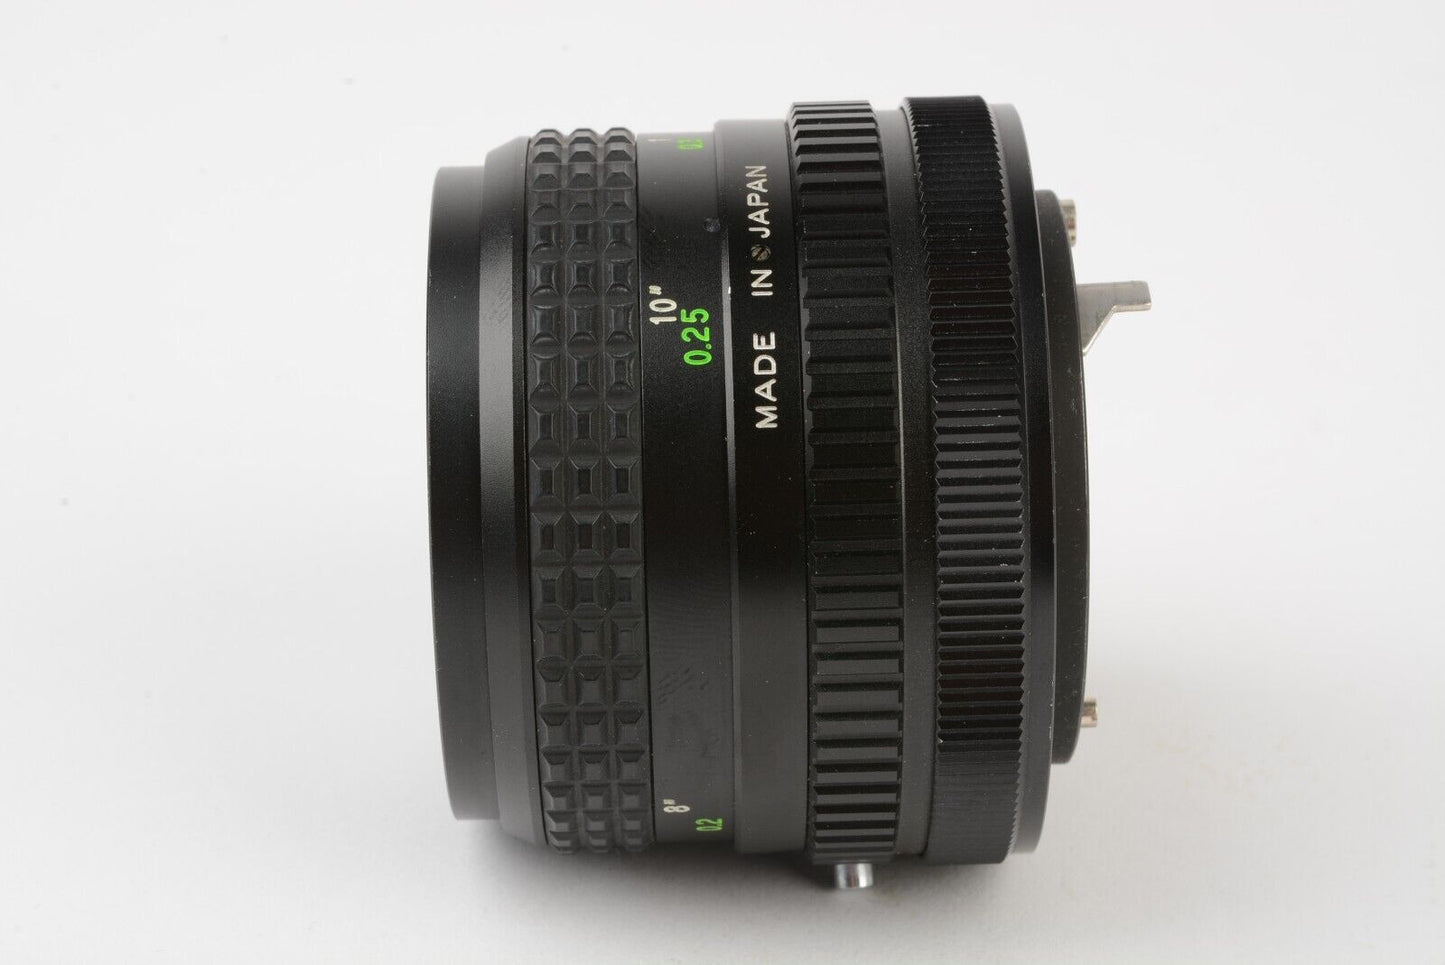 EXC++ DEITZ FOR CANON FD 28mm F2.8 WIDE ANGLE LENS, CAPS, NICE WIDE & MACRO LENS